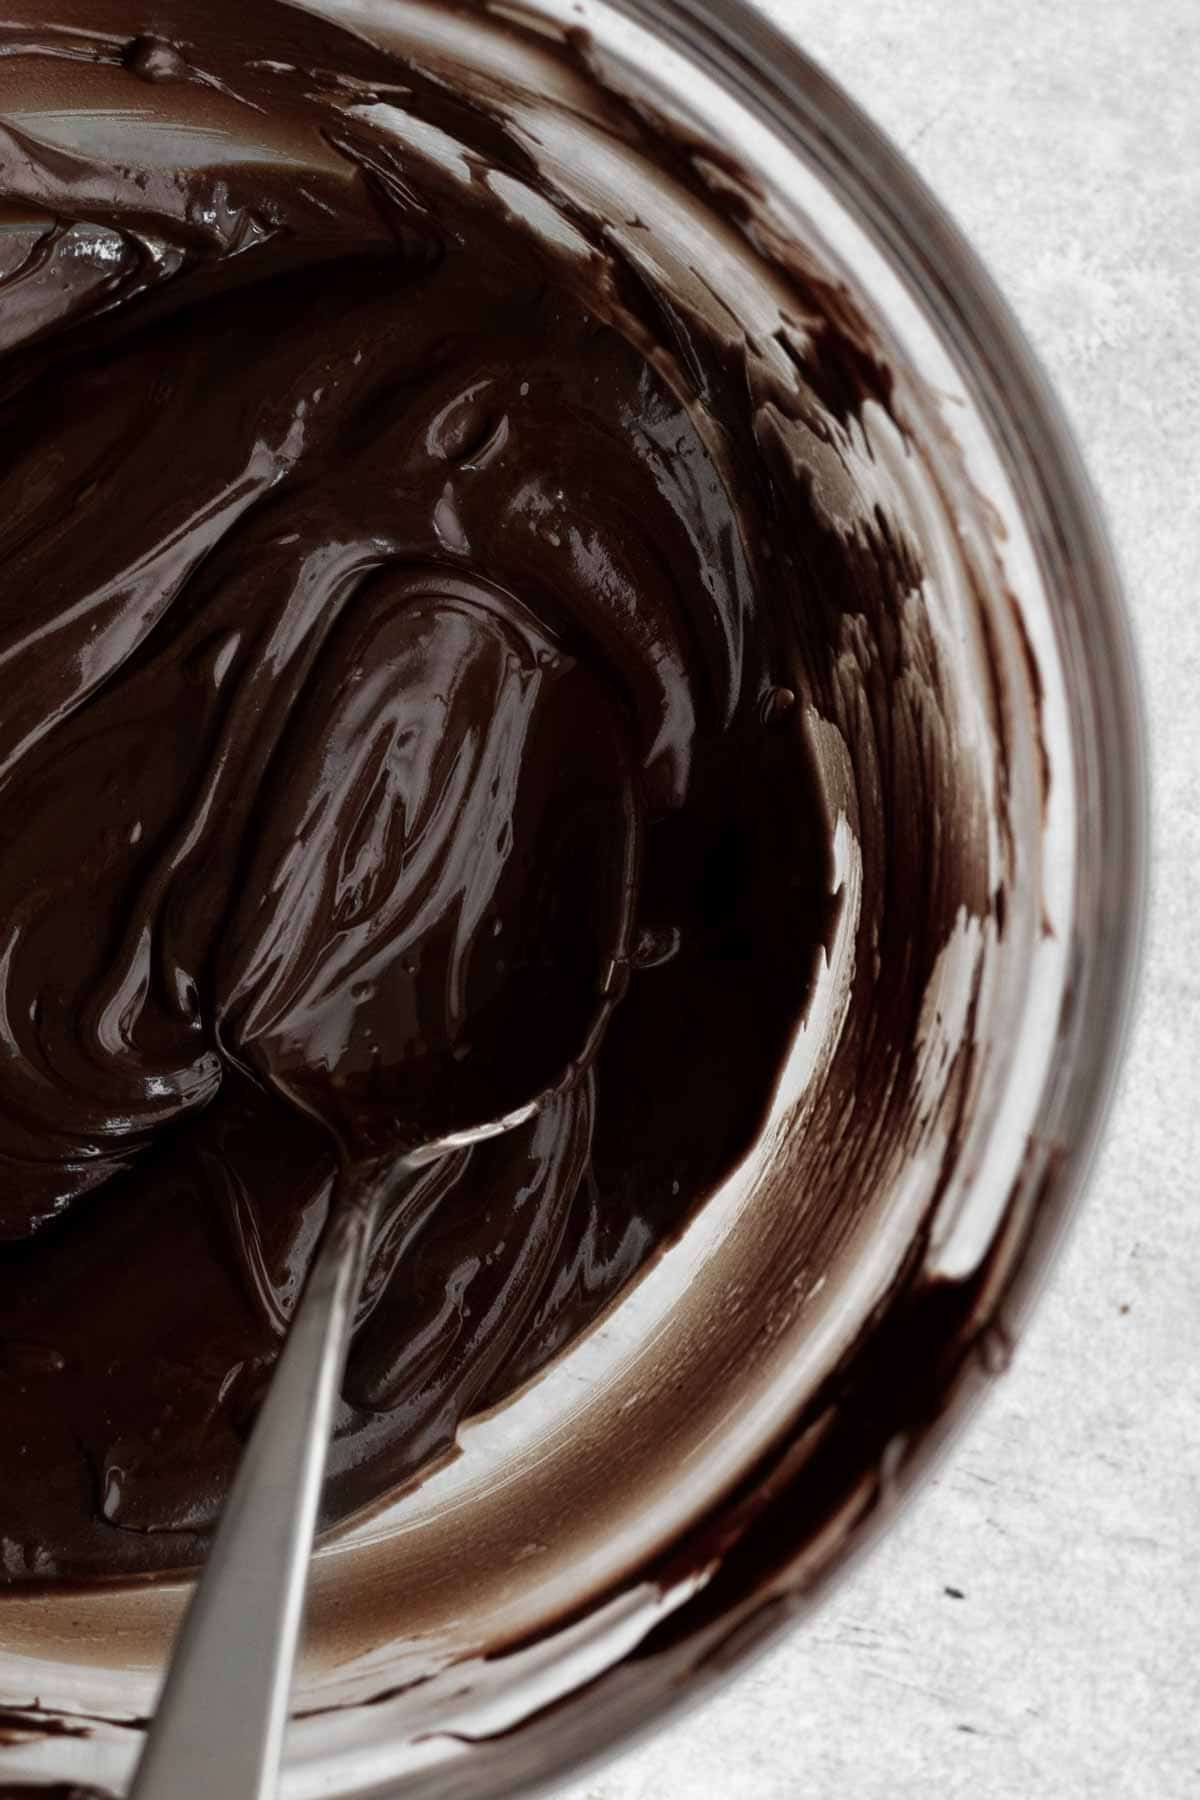 Melted chocolate with a spoon.